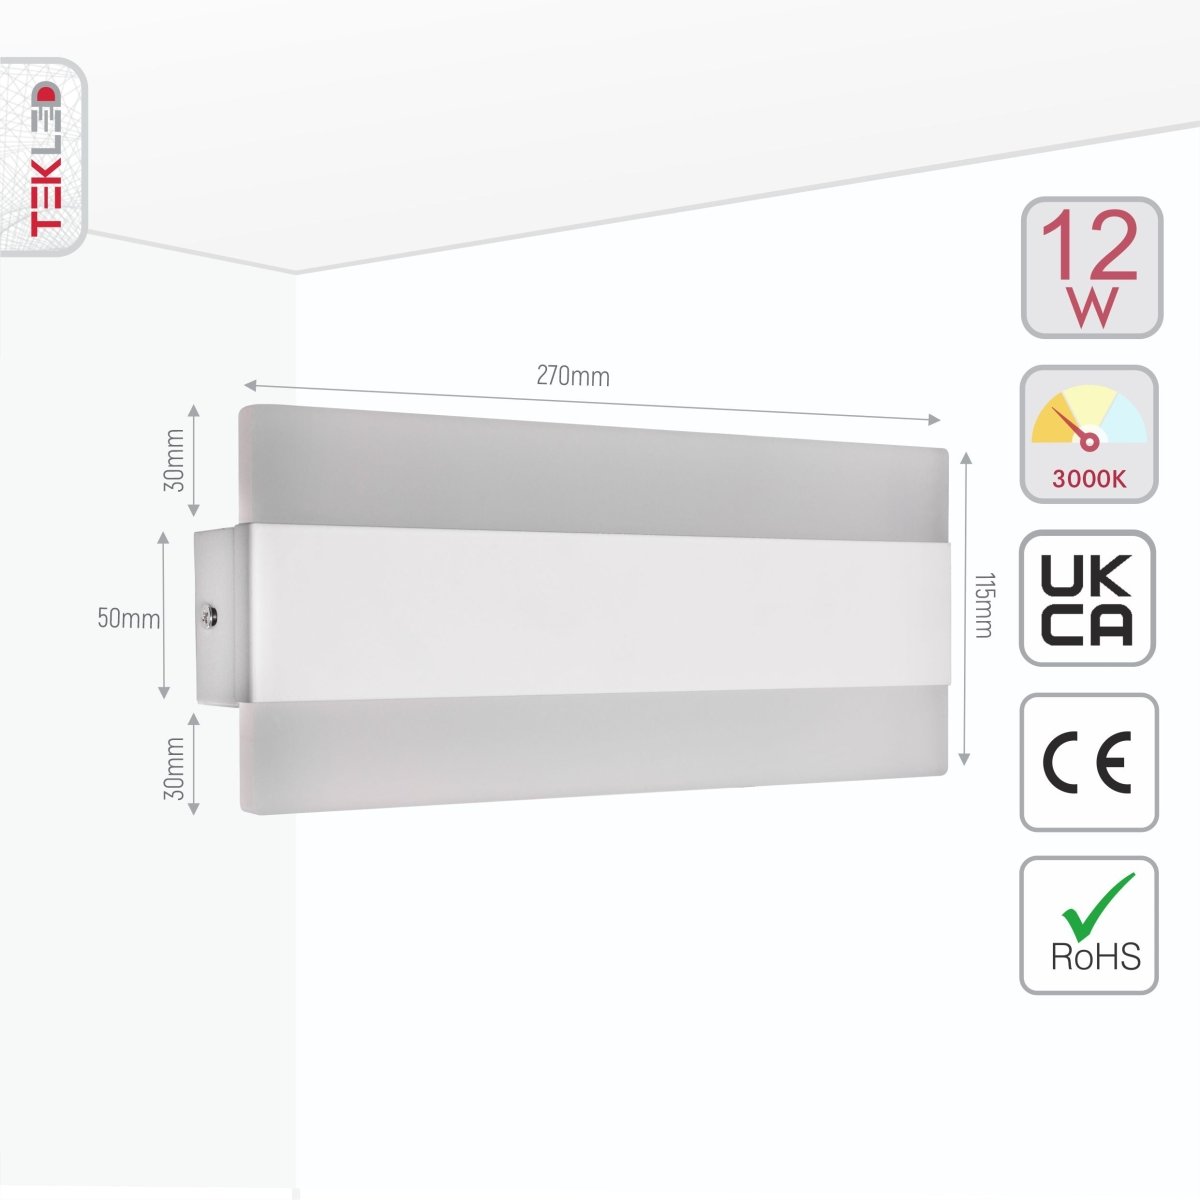 Size and specs of LED White Metal Acrylic Wall Light 12W Warm White 3000K | TEKLED 151-19542